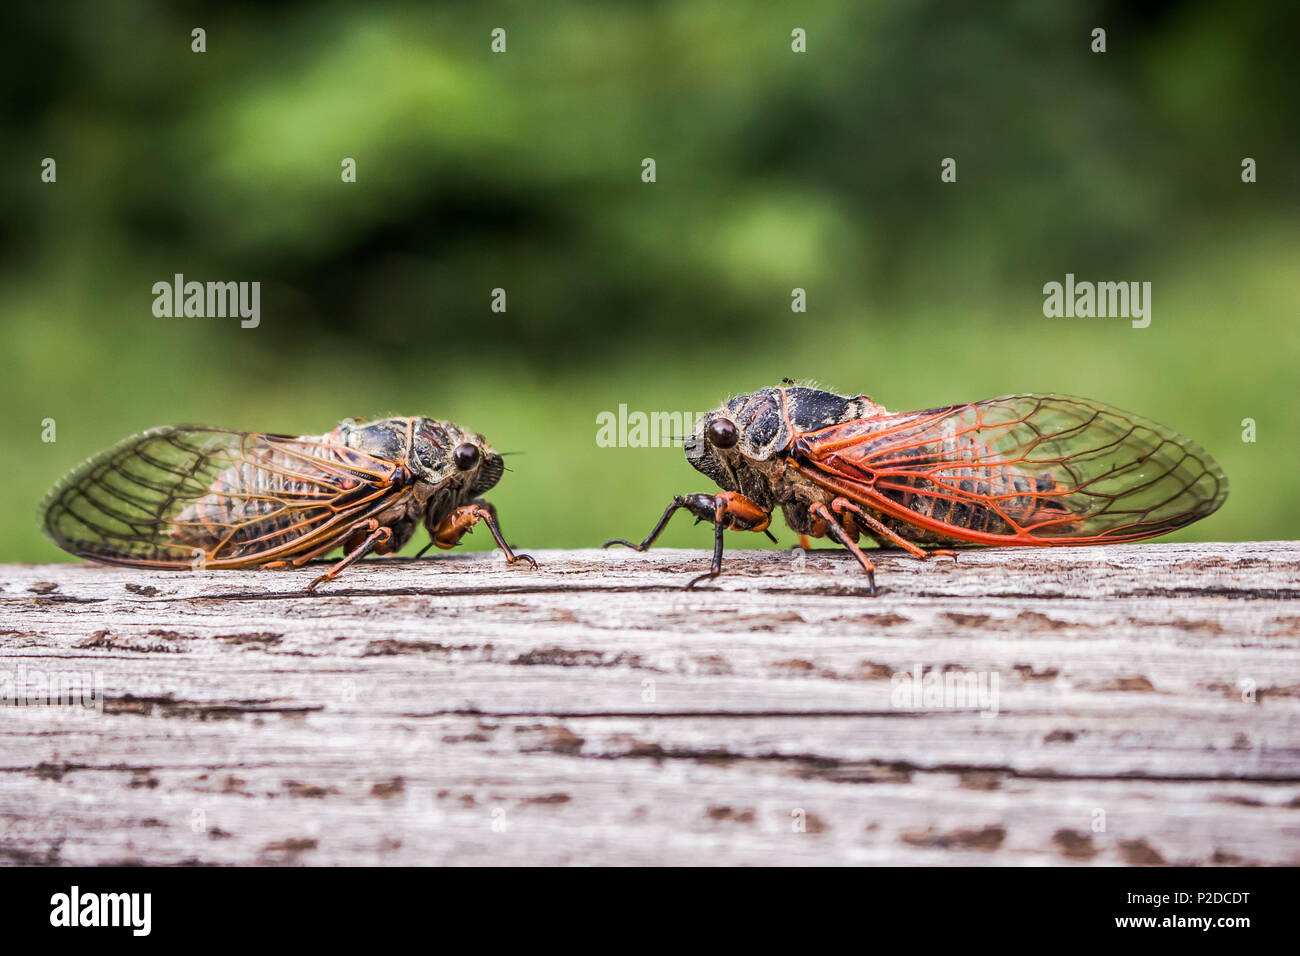 Two adult cicadas Tibicina haematodes with orange veins on the wings Stock Photo